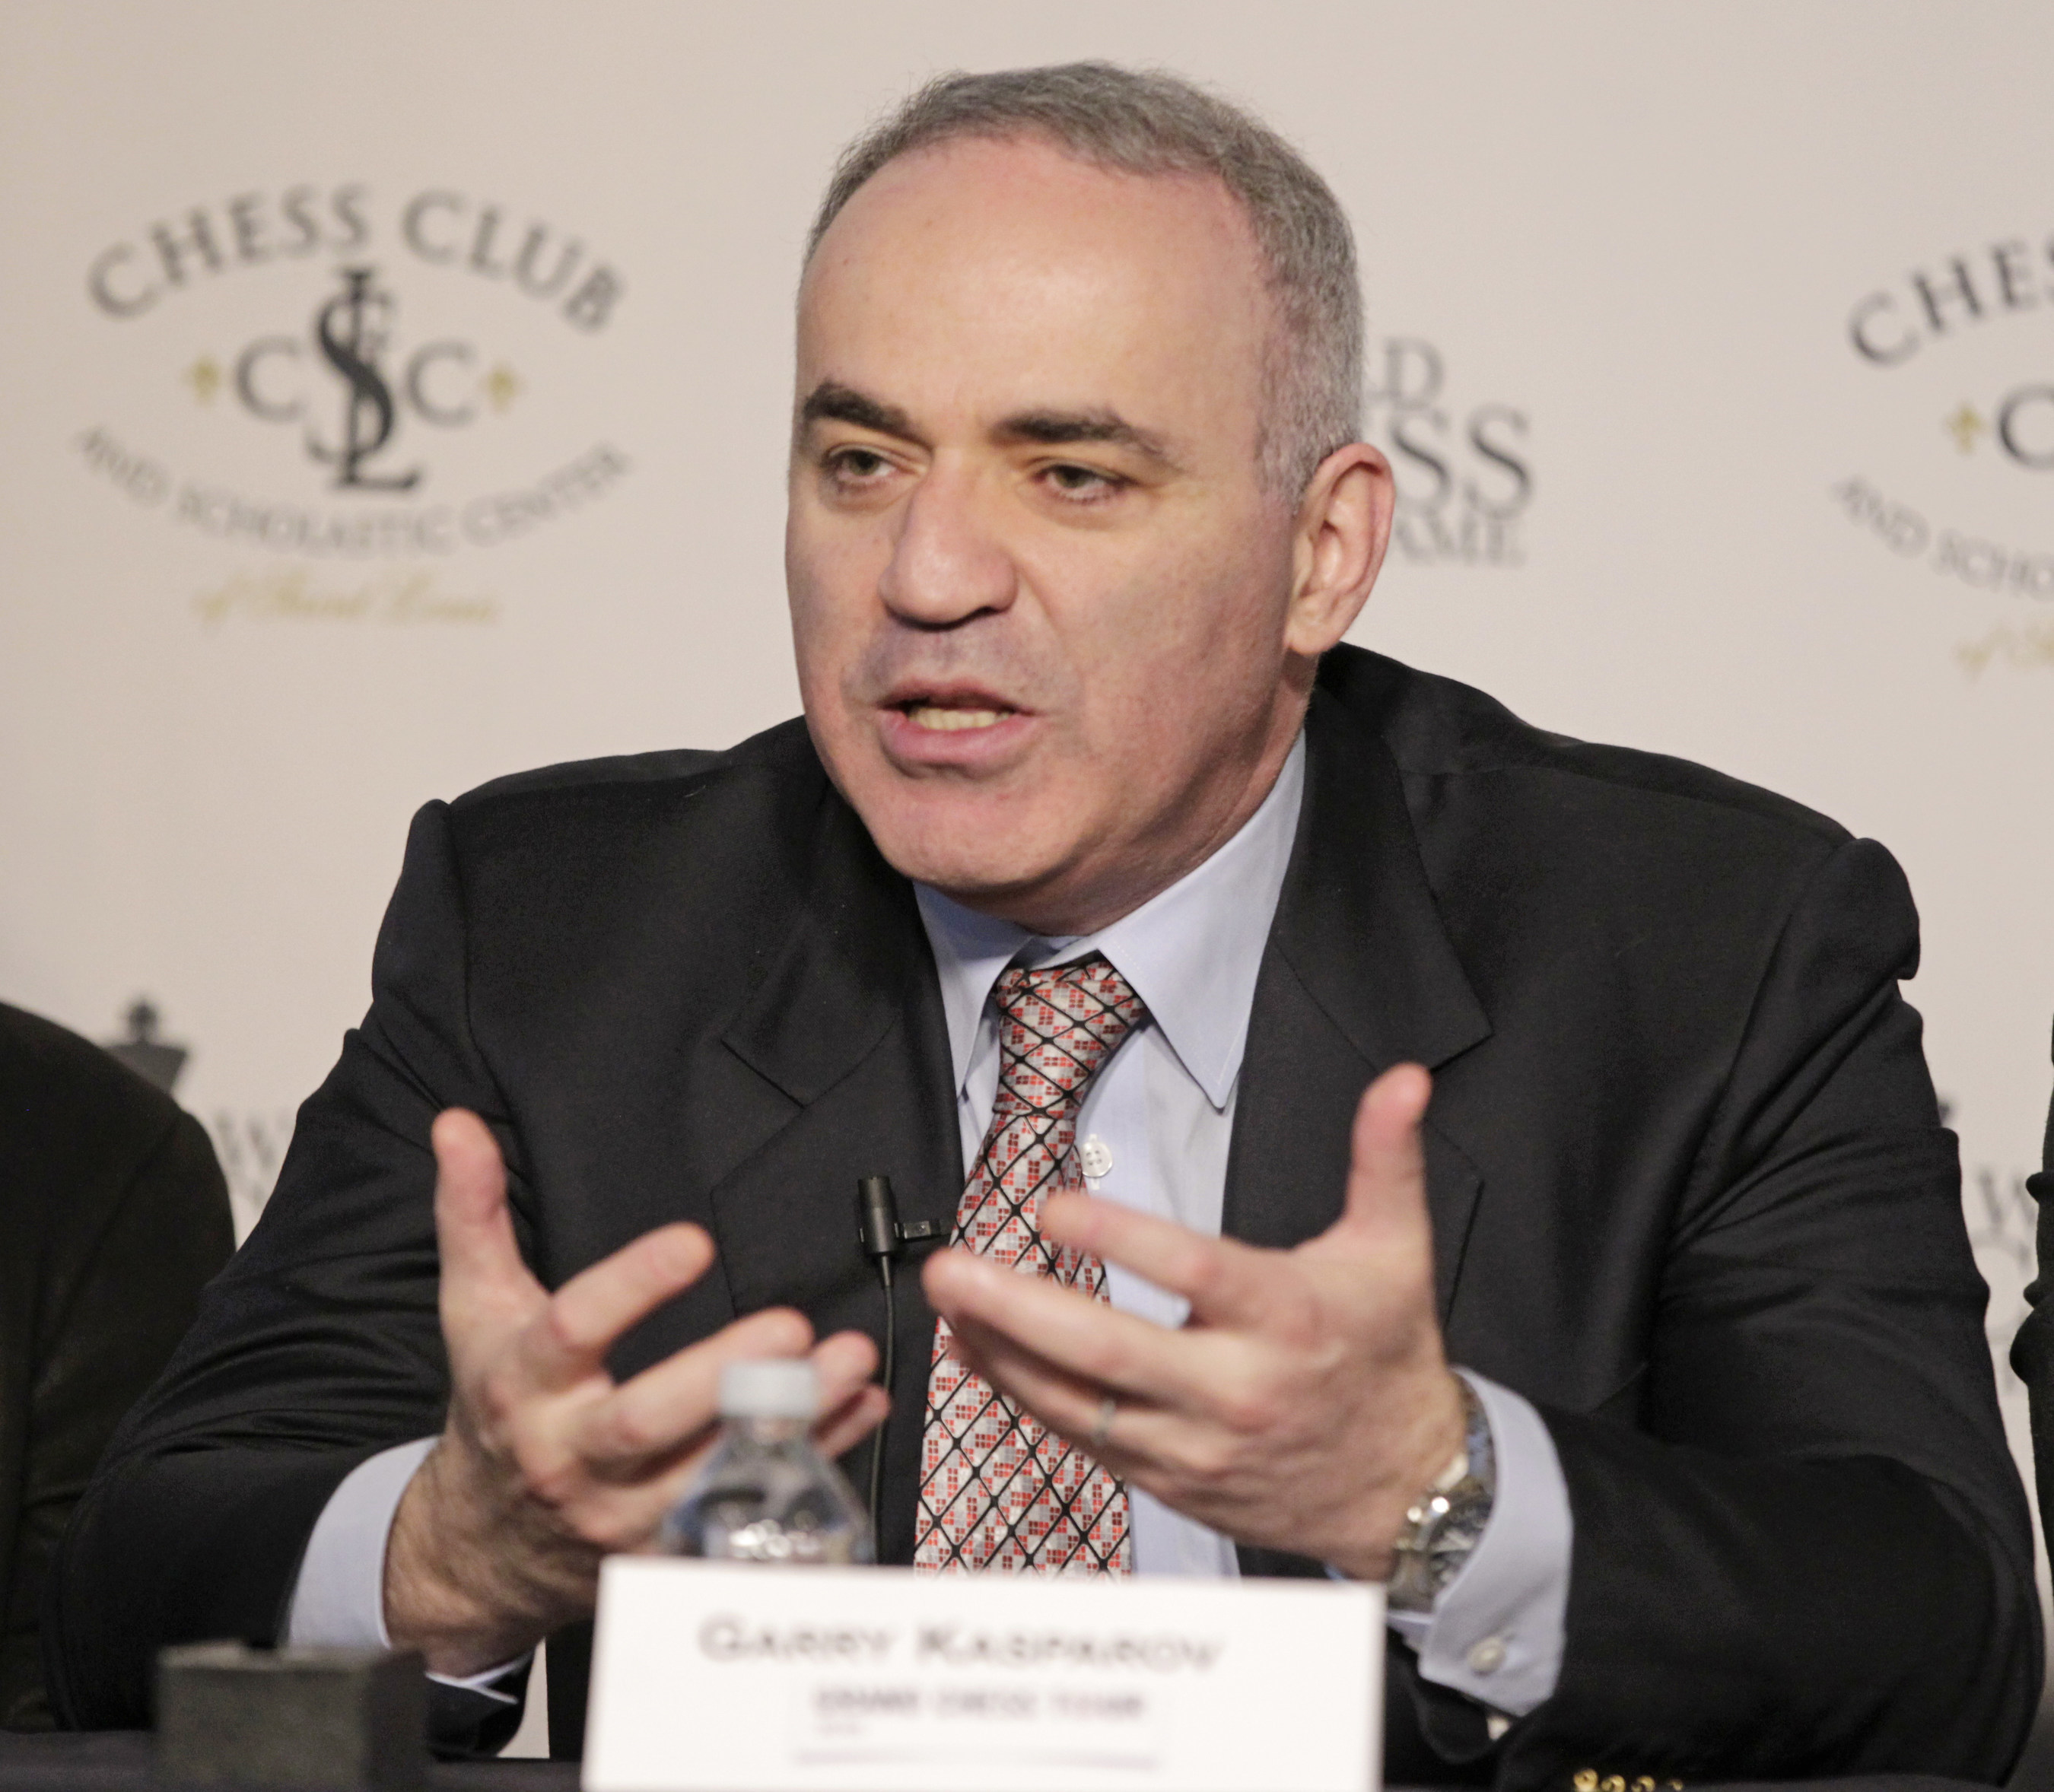 Today at the Chess Club and Scholastic Center of Saint Louis, Garry Kasparov, ambassador of the Grand Chess Tour and representatives from Sinquefield Cup, Norway Chess 2015, and London Chess Classic organizations gathered to announce a new chess circuit called the Grand Chess Tour featuring the top chess players from around the world.